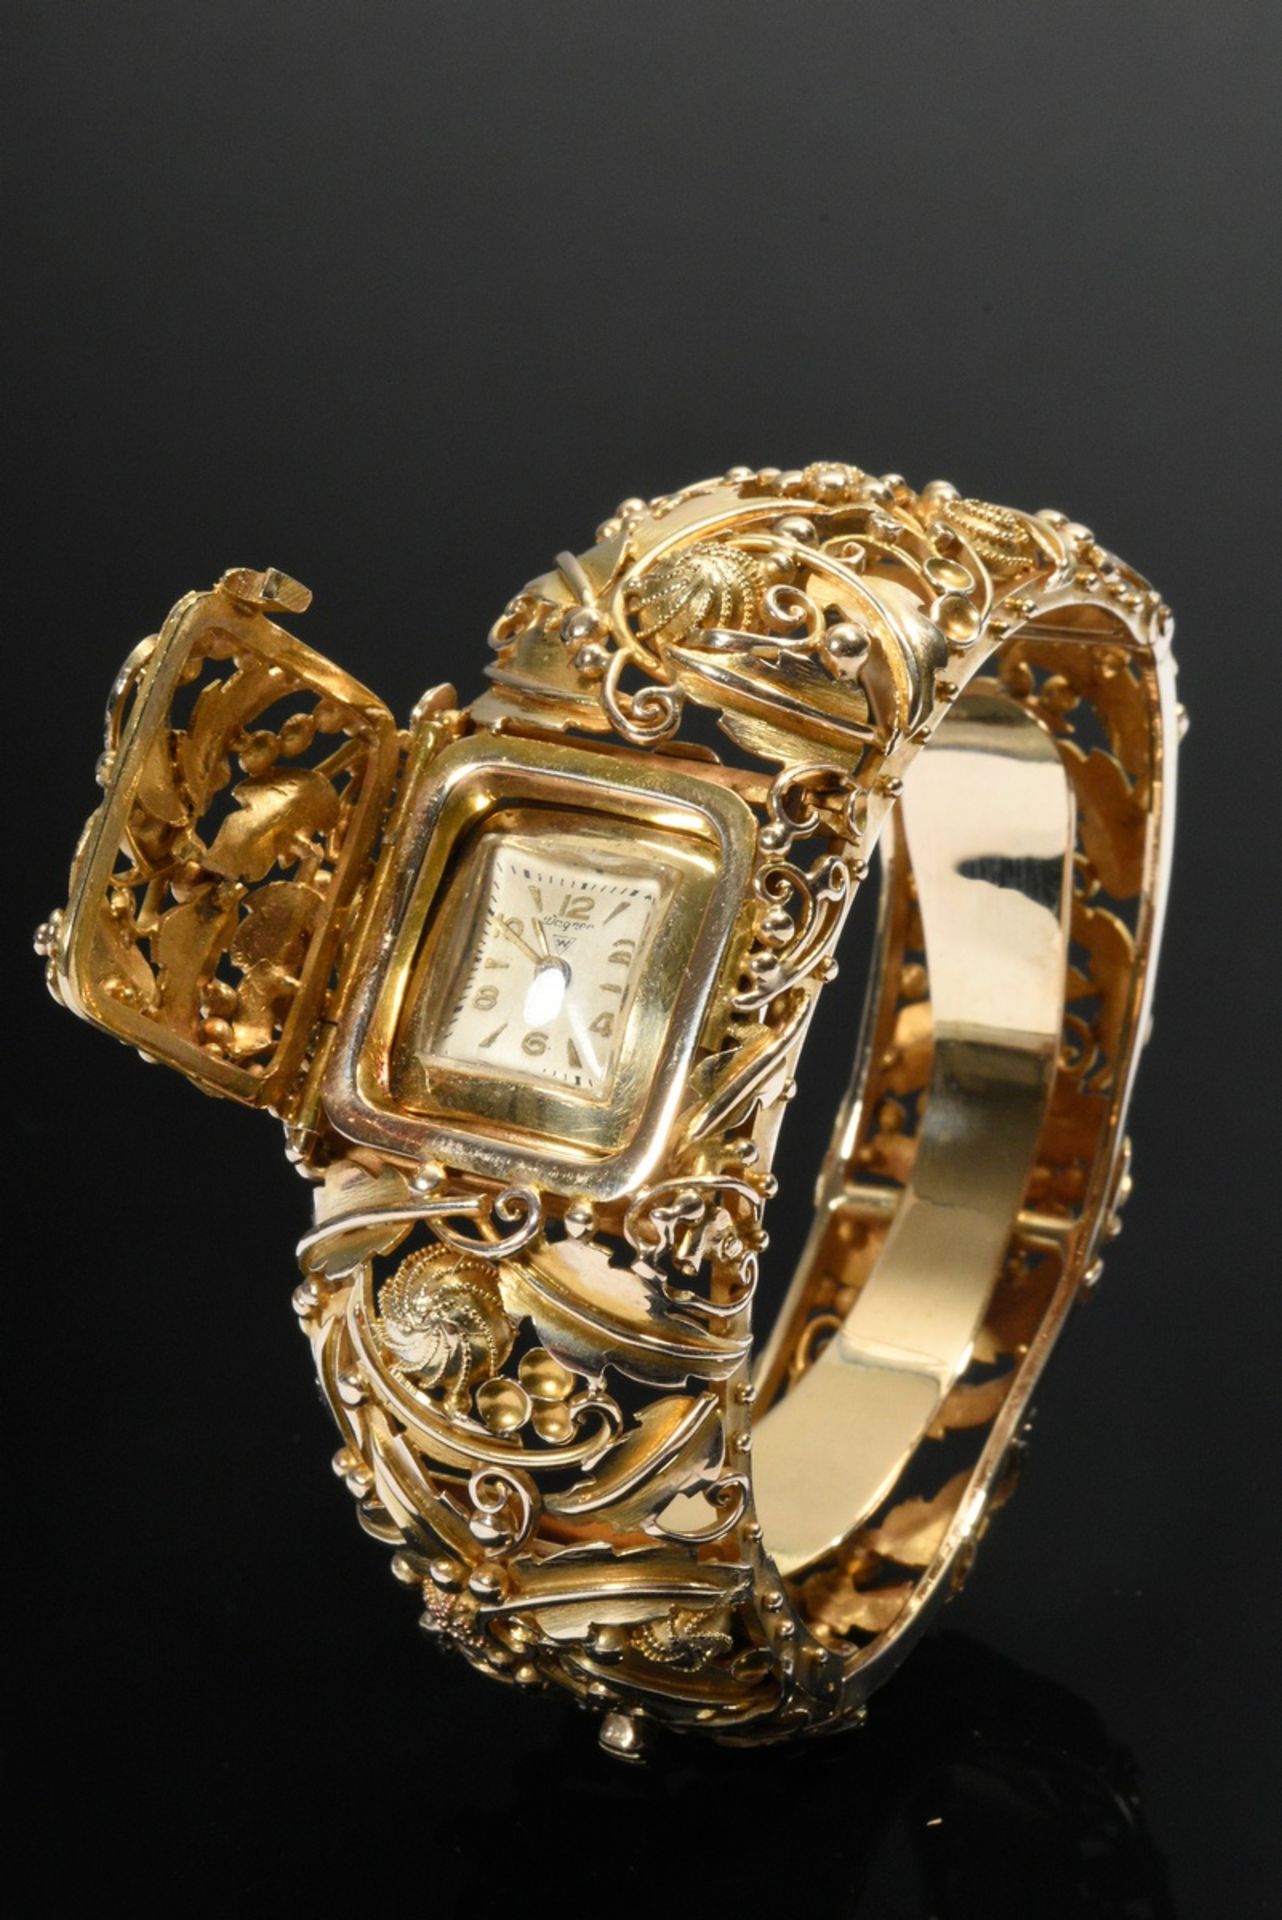 Oval yellow gold 585 bangle with hidden Wagner watch under hinged cover, leaf and flower ornaments  - Image 2 of 6